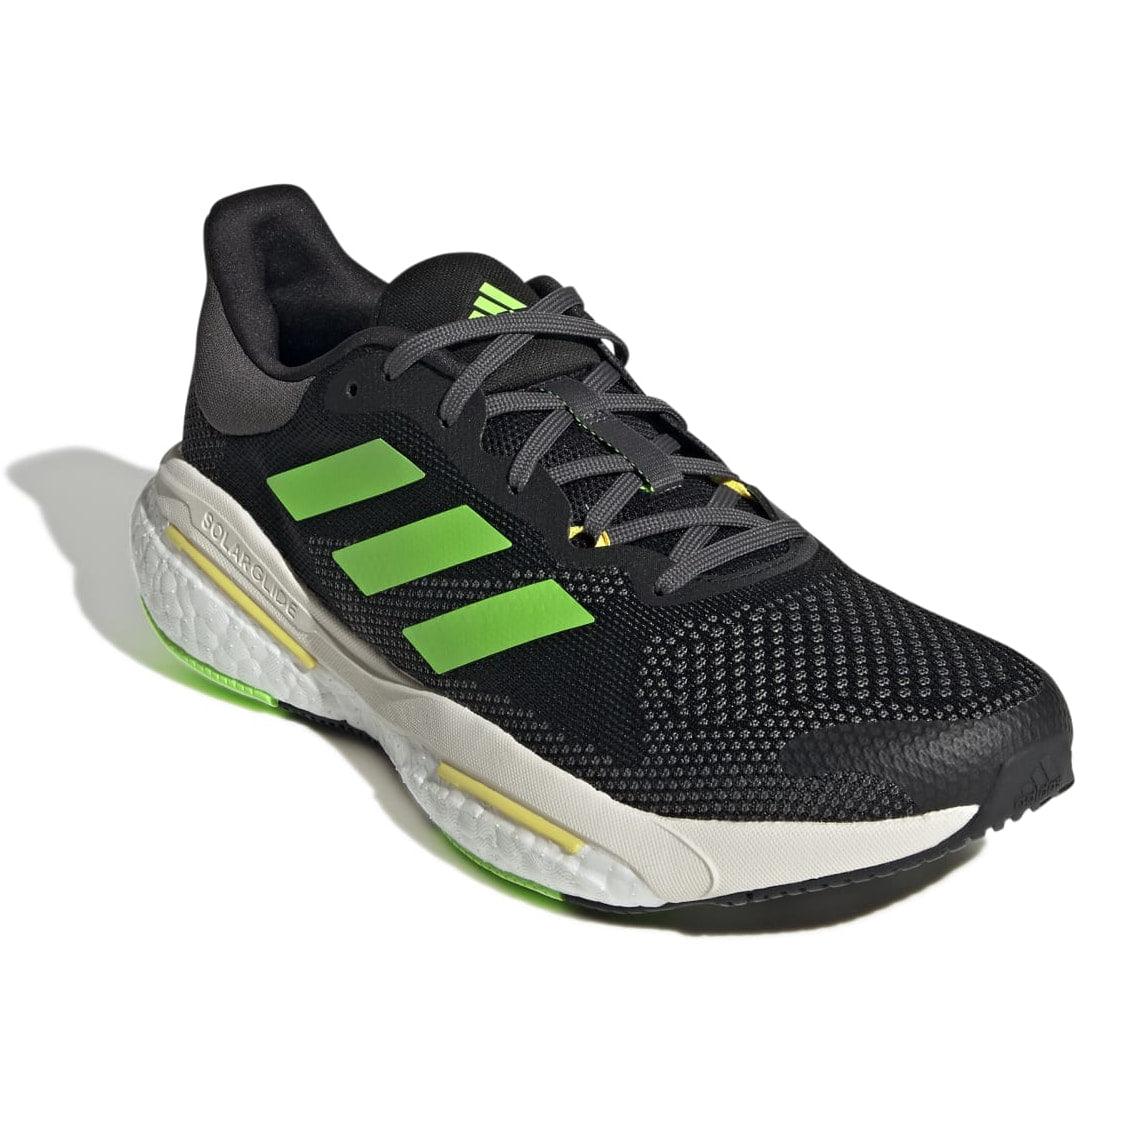 Adidas Solarglide 5 Men's - The Sweat Shop